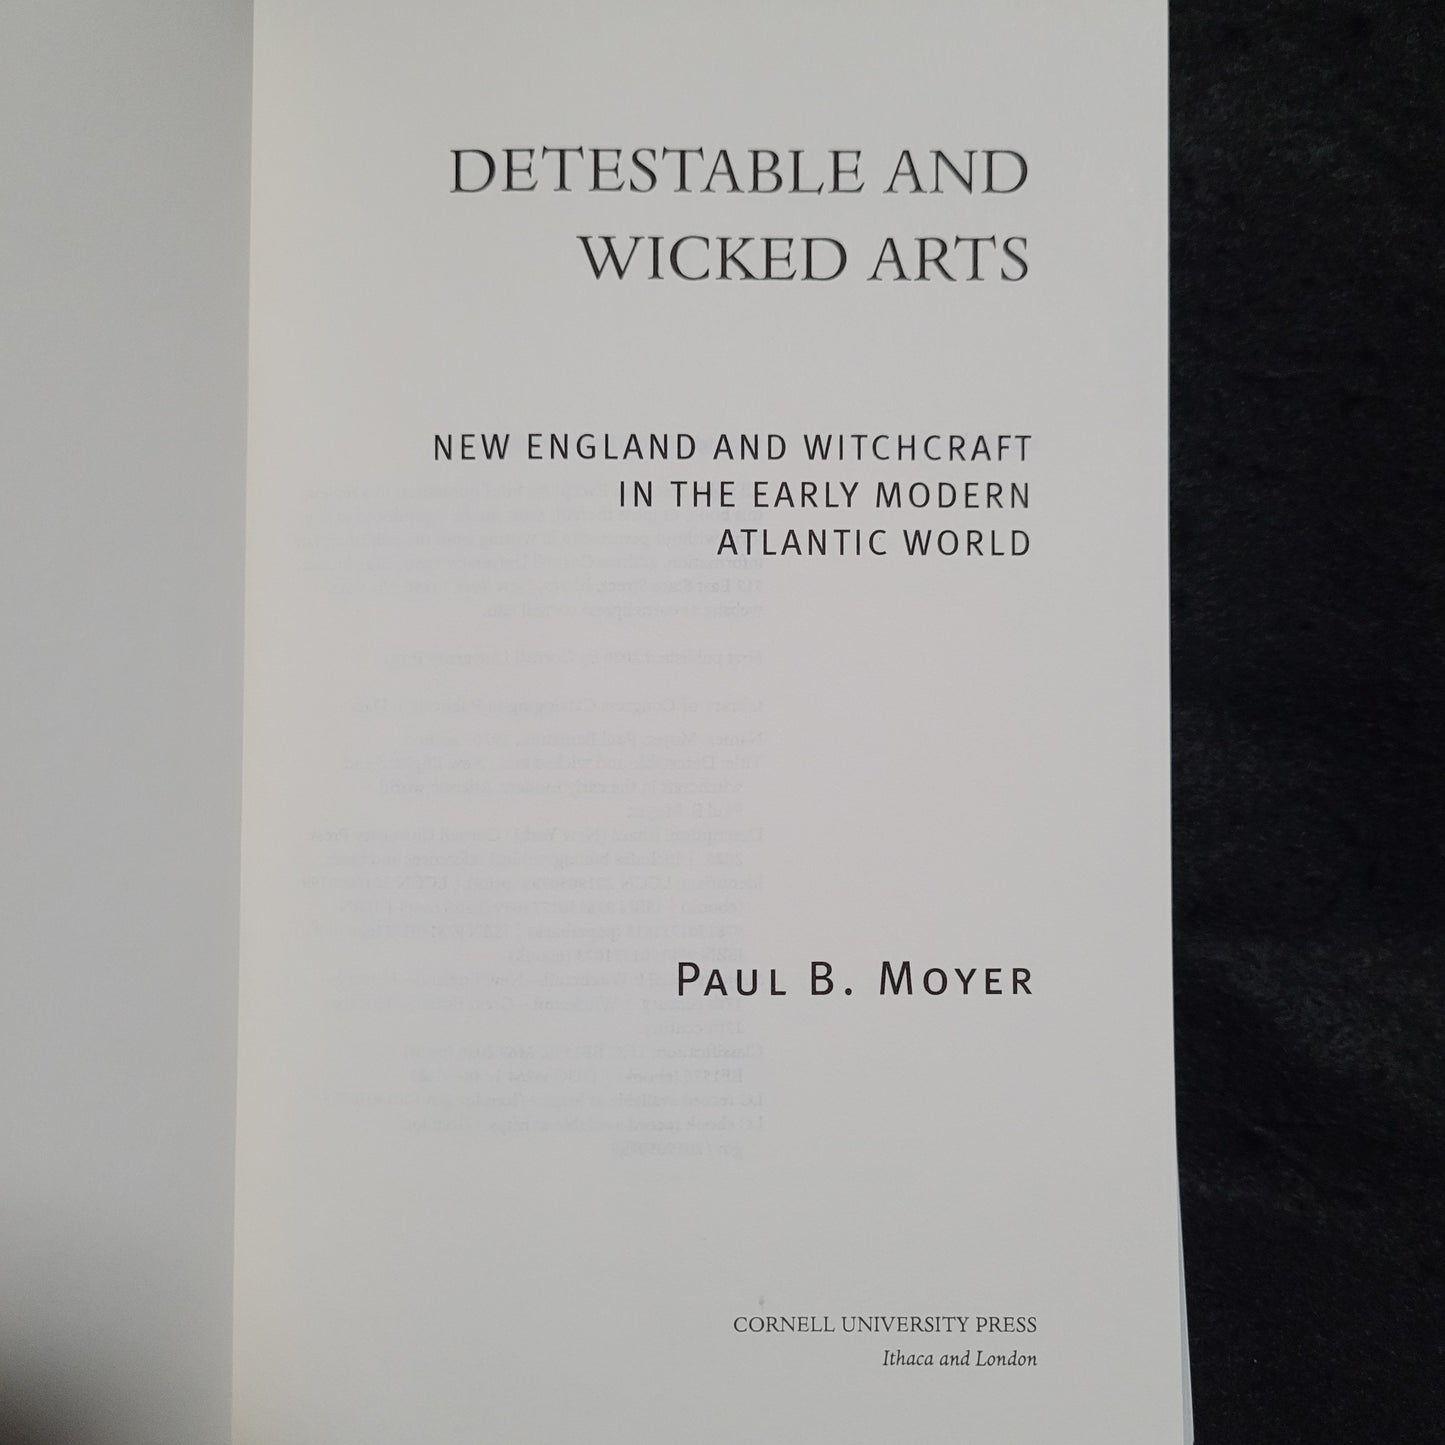 Detestable and Wicked Arts: New England and Witchcraft in the Early Modern Atlantic World by Paul B. Moyer (Cornell University Press, 2020) Paperback